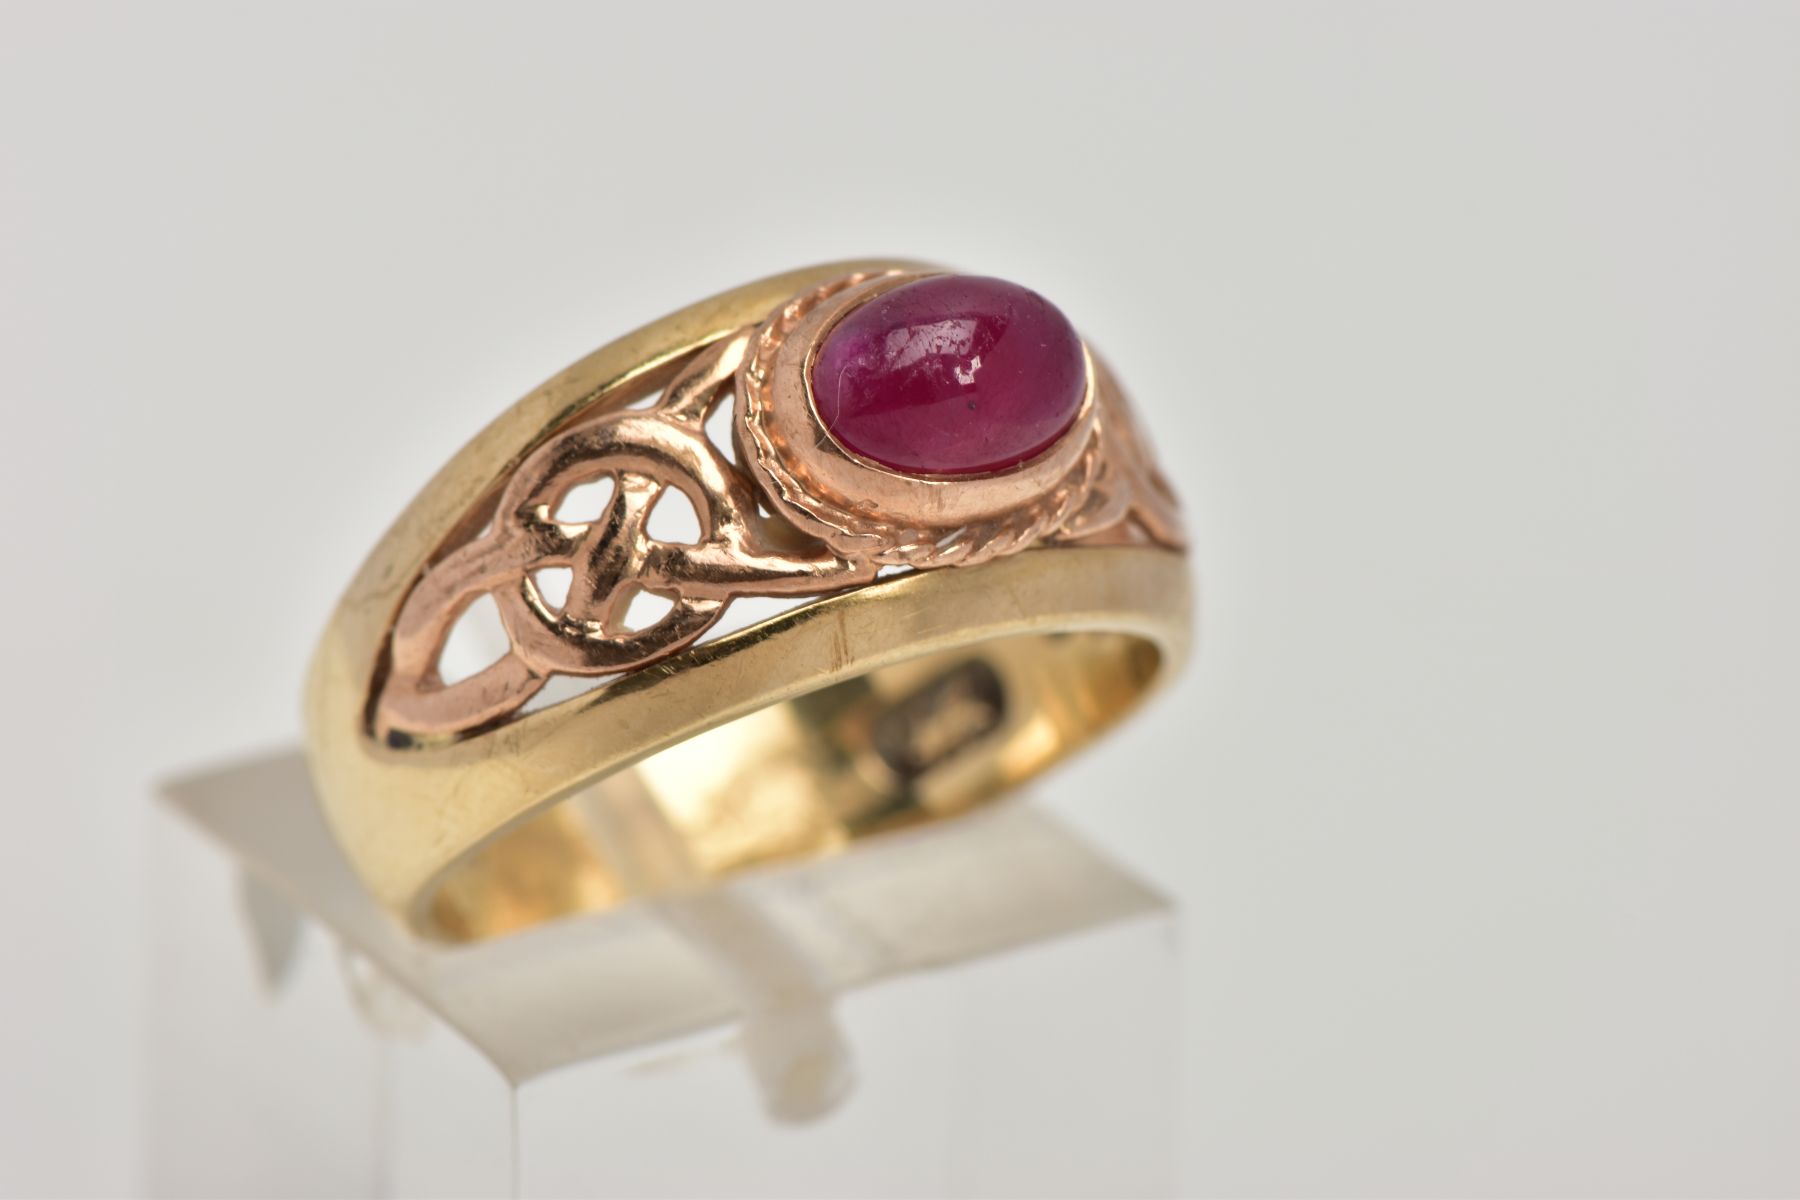 A 9CT GOLD 'CLOGAU' SIGNET RING, designed with a central oval ruby cabochon, collet mount with a - Image 4 of 5